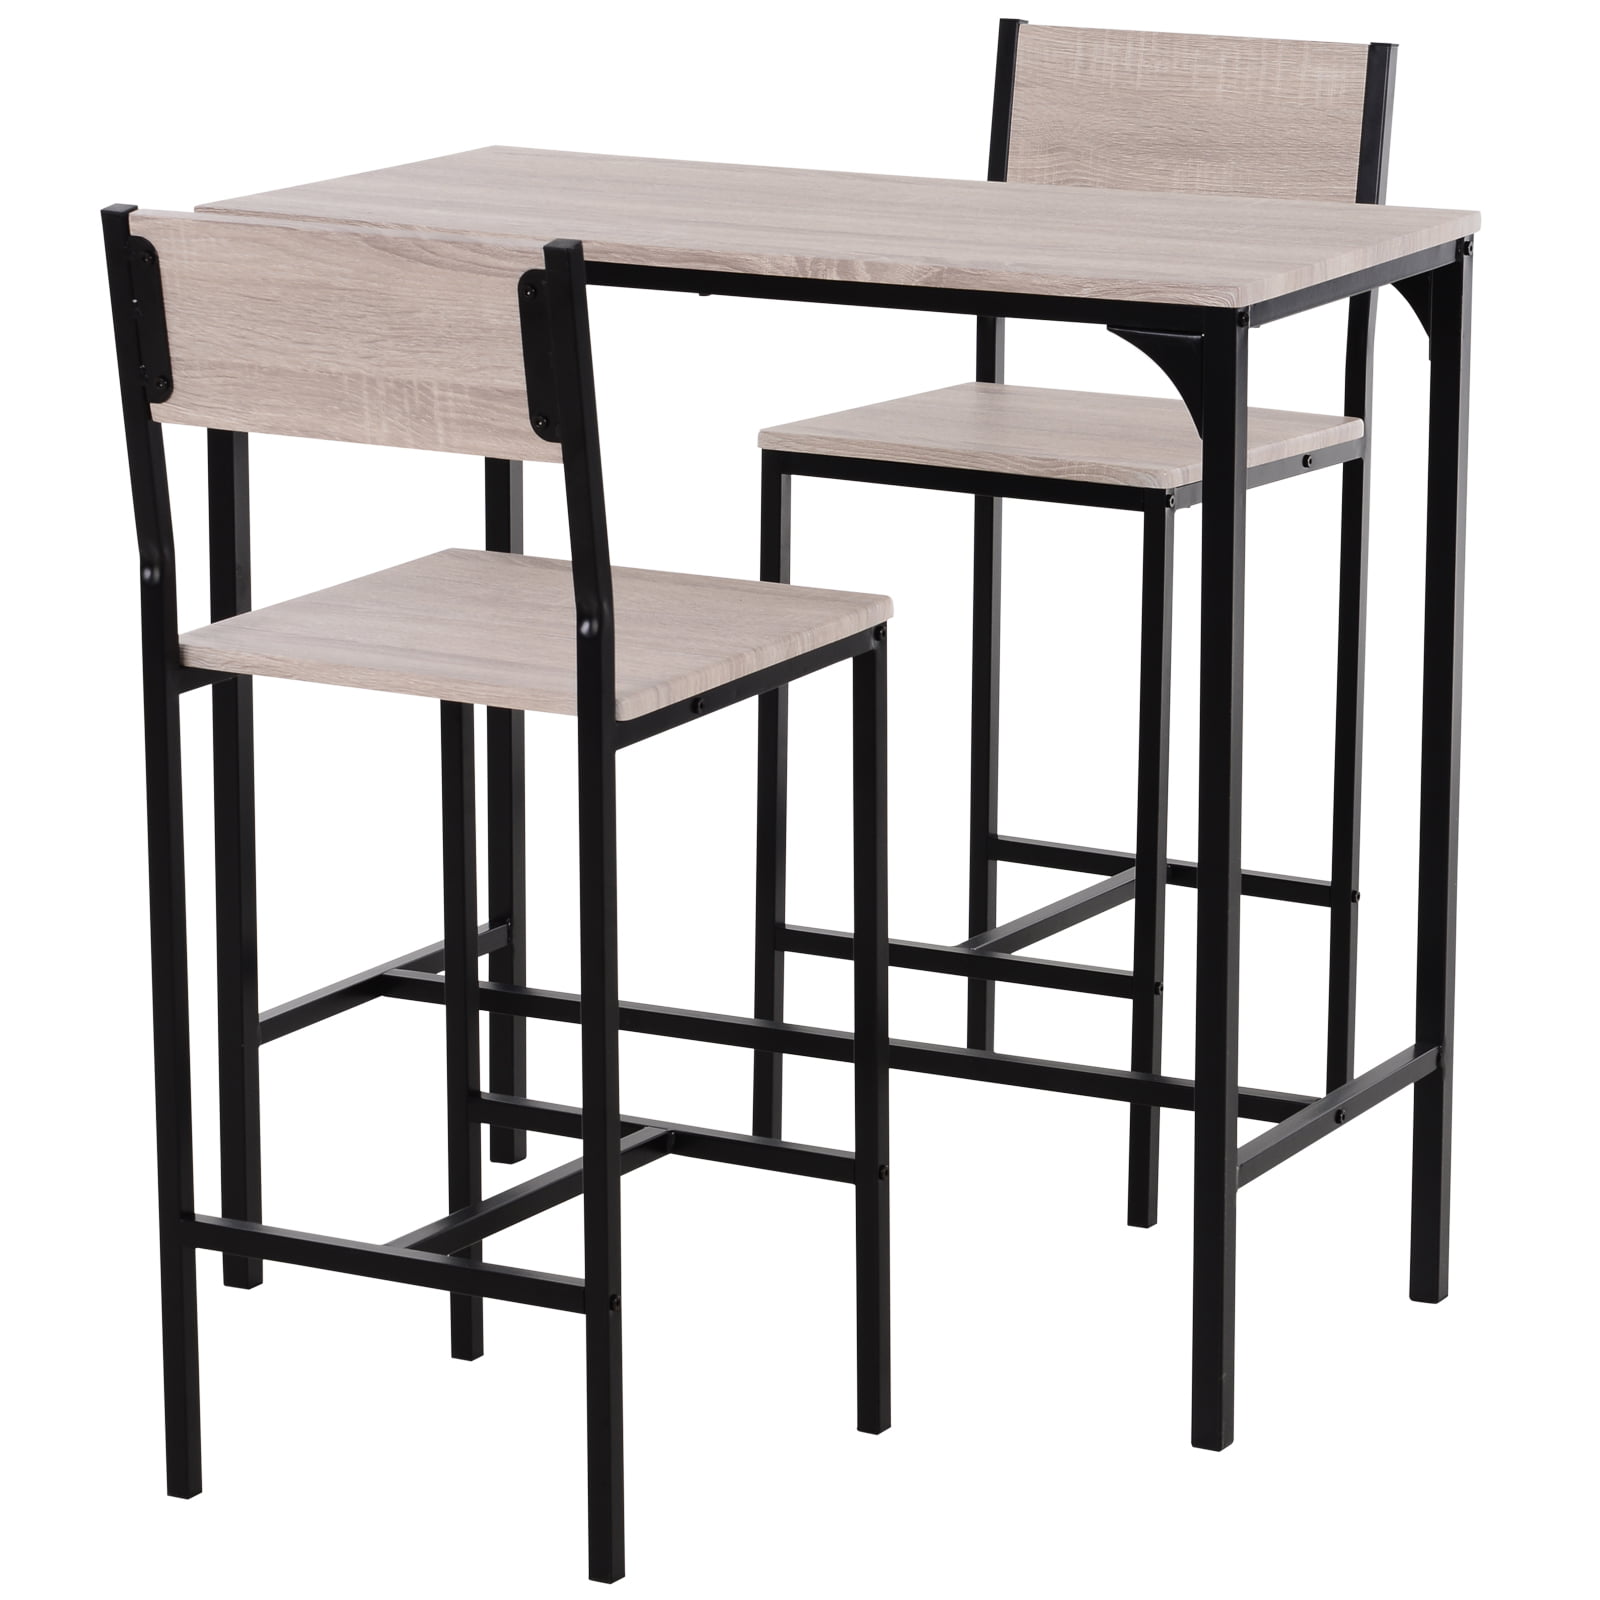 Industrial CounterHeight 3Piece Table and 2 High Back Stools Set for Small Space in the